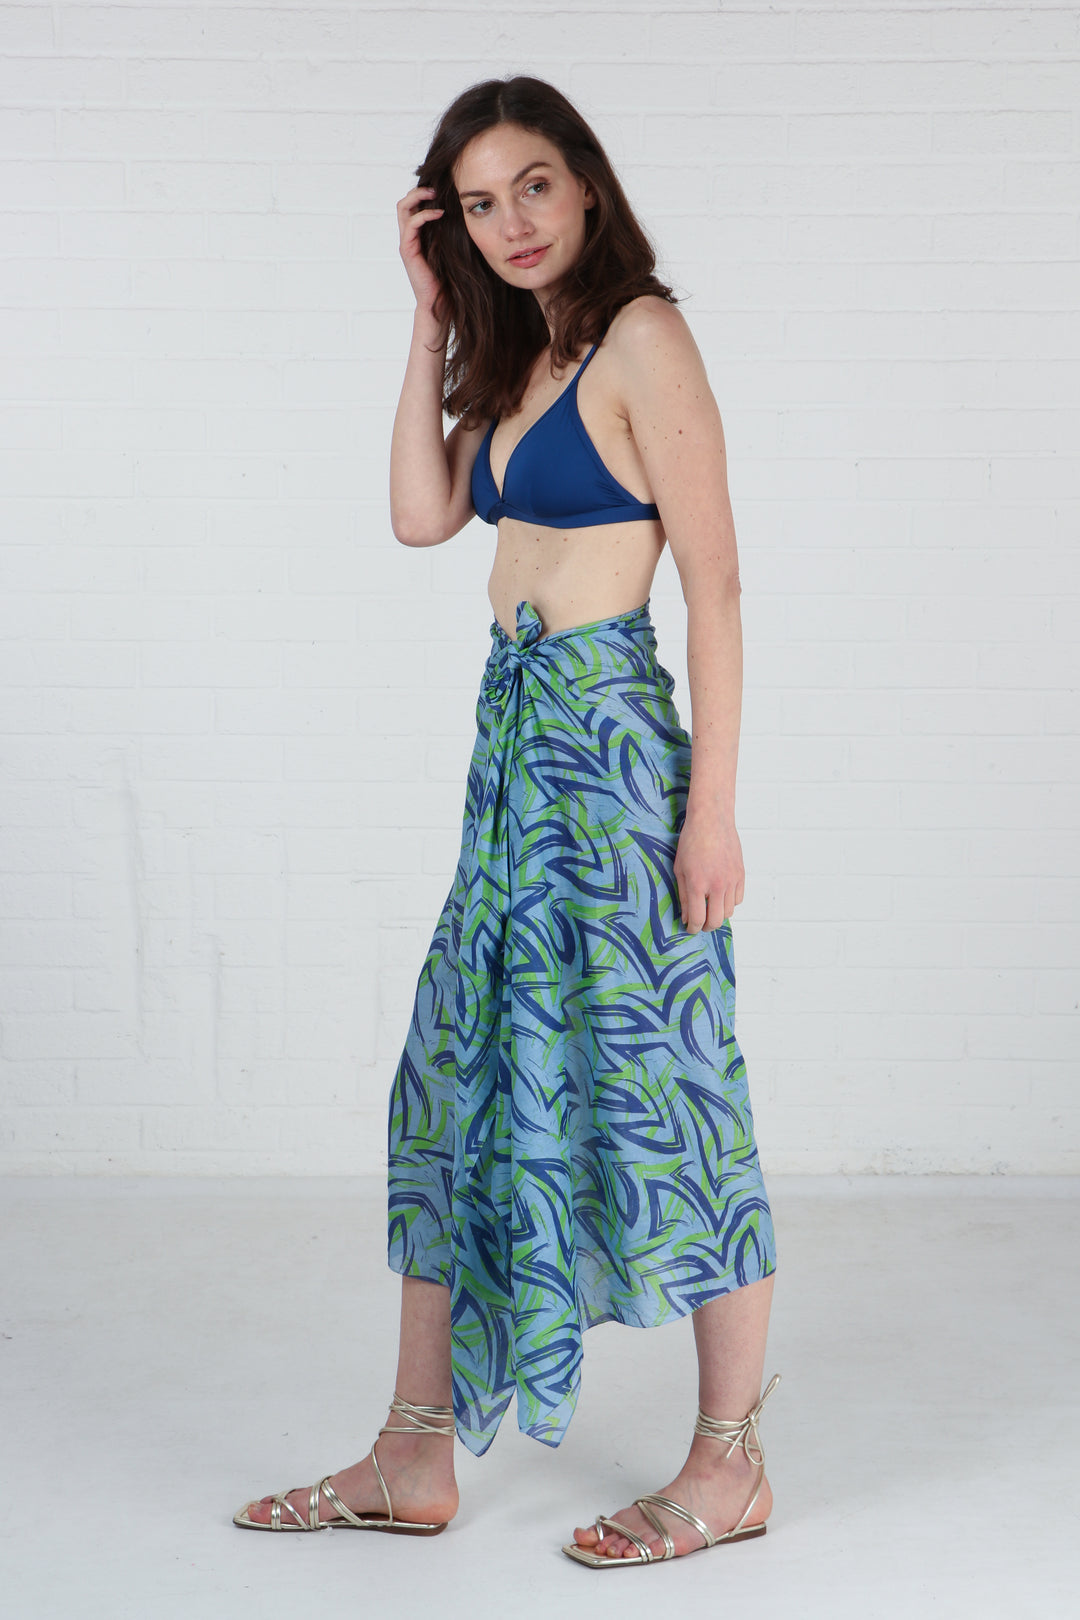 blue and green brushstroke pattern scarf being worn as a beach coverup sarong